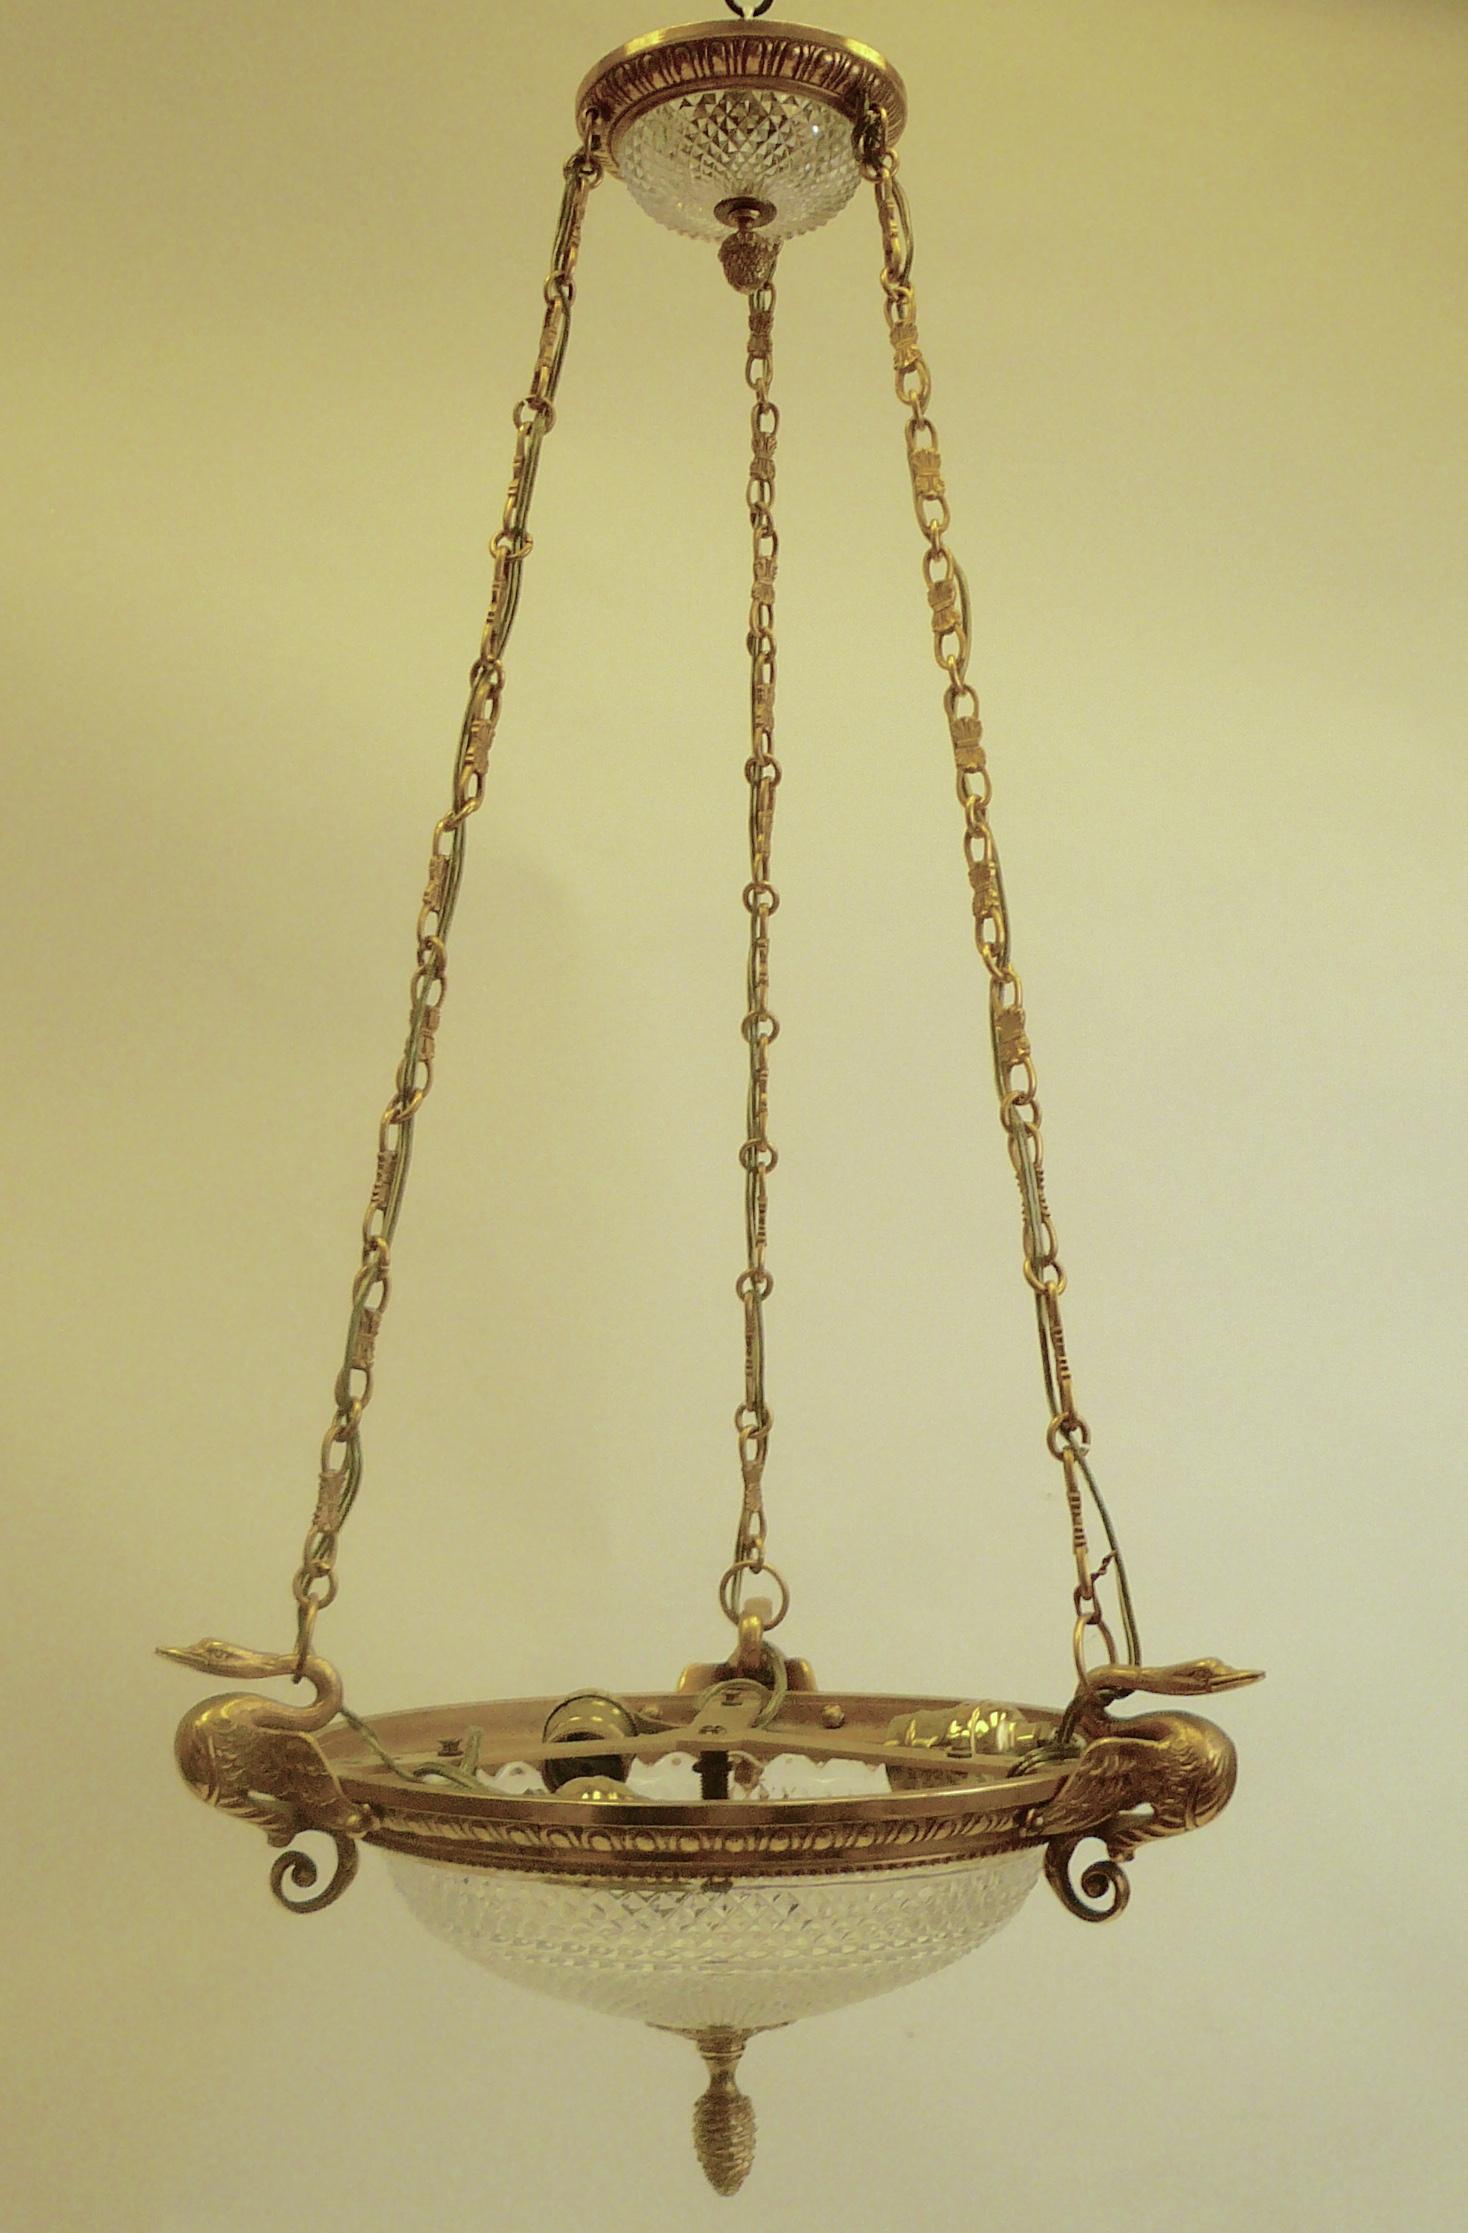 This hanging fixture features neoclassical motifs, including egg and dart moulding and swan finials. The crystal is finely cut in a diamond pattern with stepped borders.